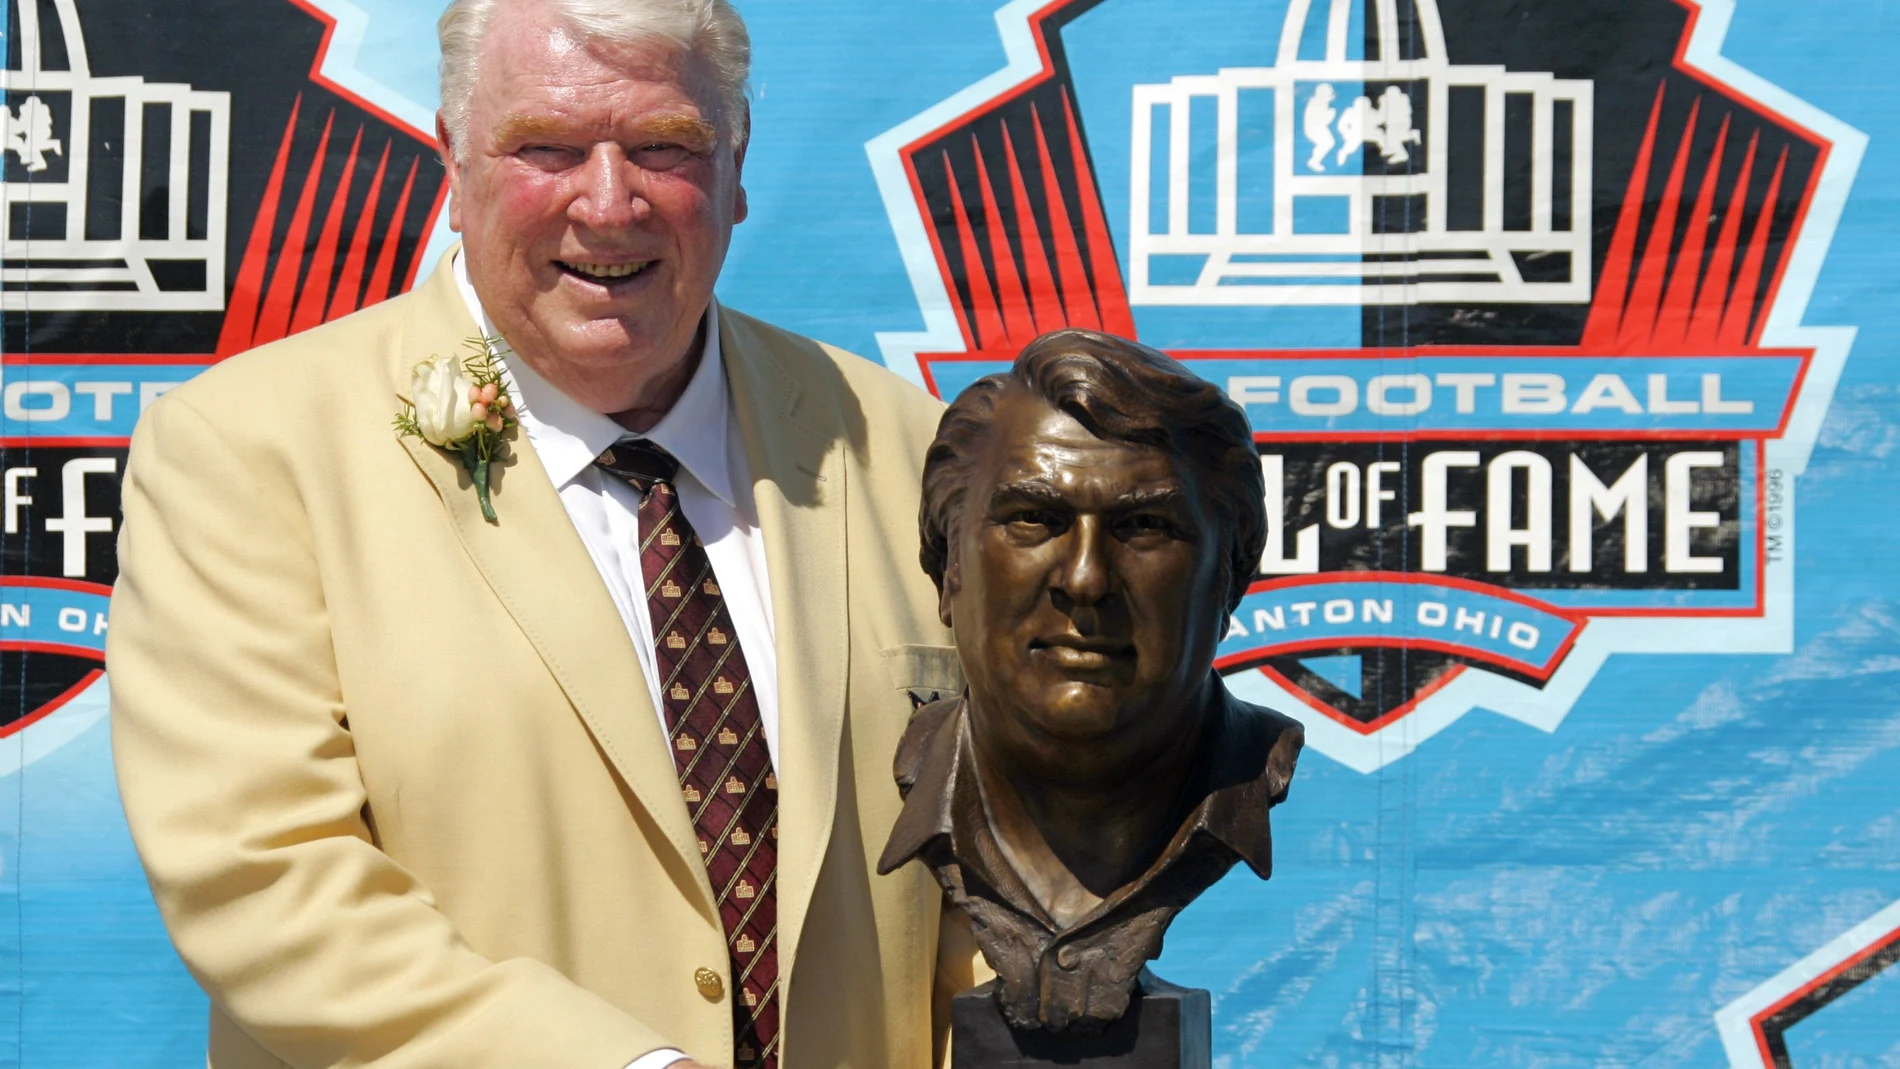 FILE - Broadcaster and former Oakland Raiders coach John Madden poses with his bust after enshrinement into the Pro Football Hall of Fame Saturday, Aug. 5, 2006, in Canton, Ohio. John Madden, the Hall of Fame coach turned broadcaster whose exuberant calls combined with simple explanations provided a weekly soundtrack to NFL games for three decades, died Tuesday, Dec. 28, 2021, the NFL said. He was 85.(AP Photo/Mark Duncan, File)